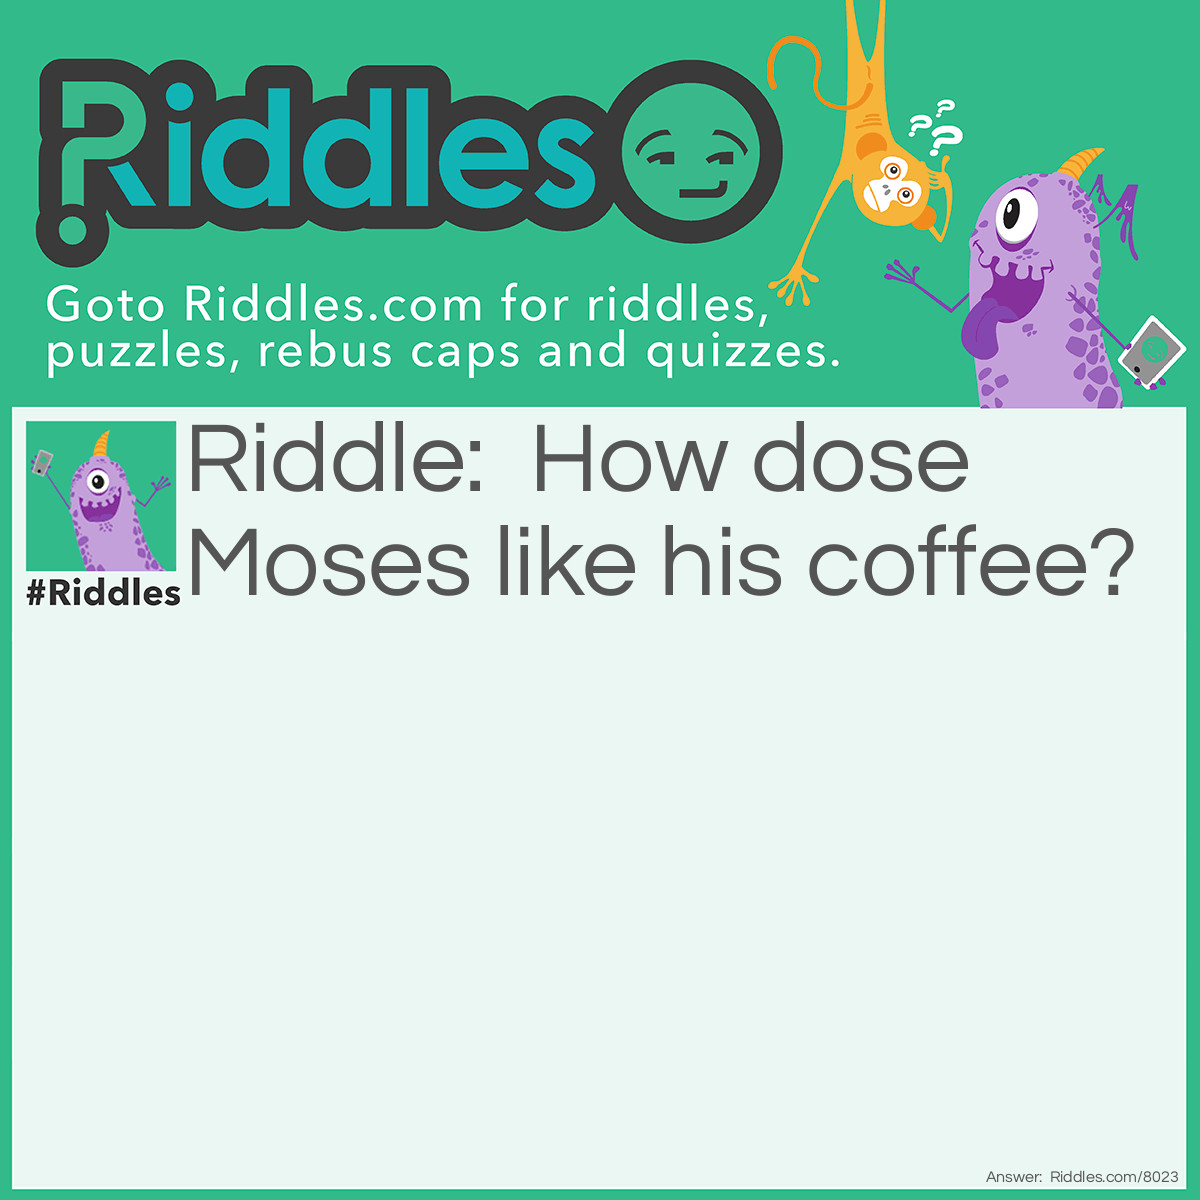 Riddle: How dose Moses like his coffee? Answer: He-brews it!